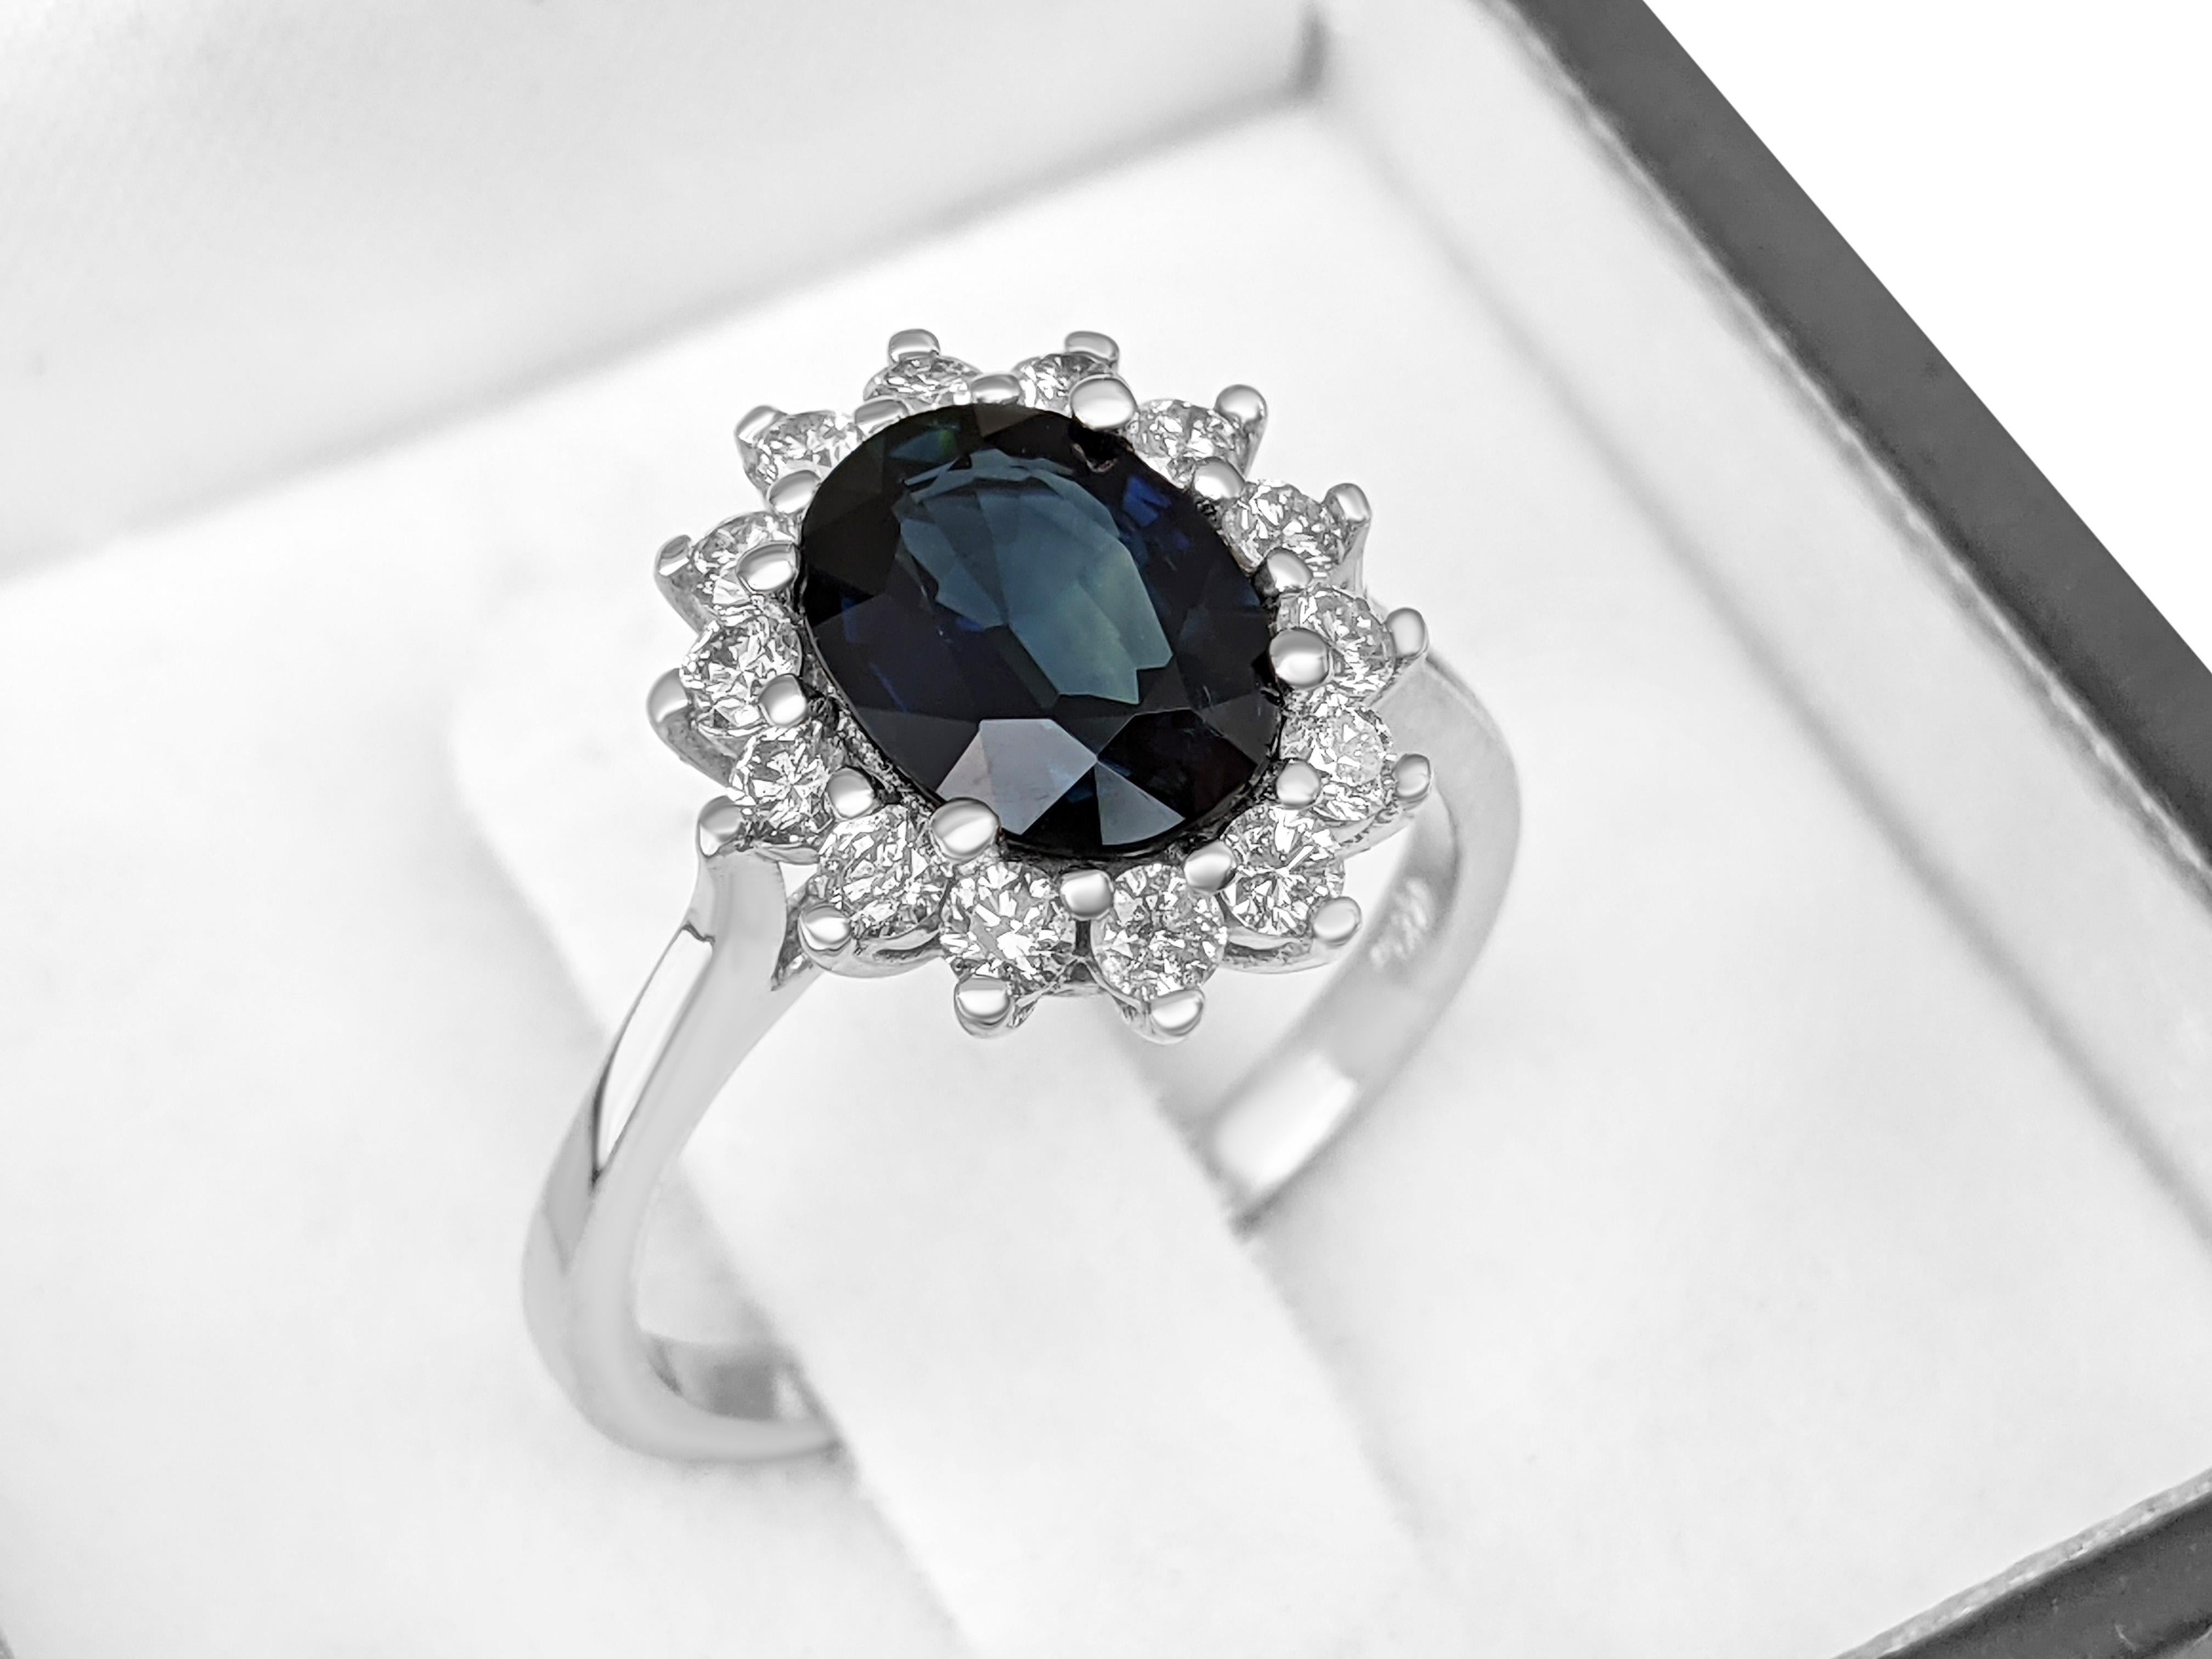 Art Deco $1 No Reserve! - 1.99 Carat Sapphire and 0.50ct Diamonds, 14kt White Gold Ring